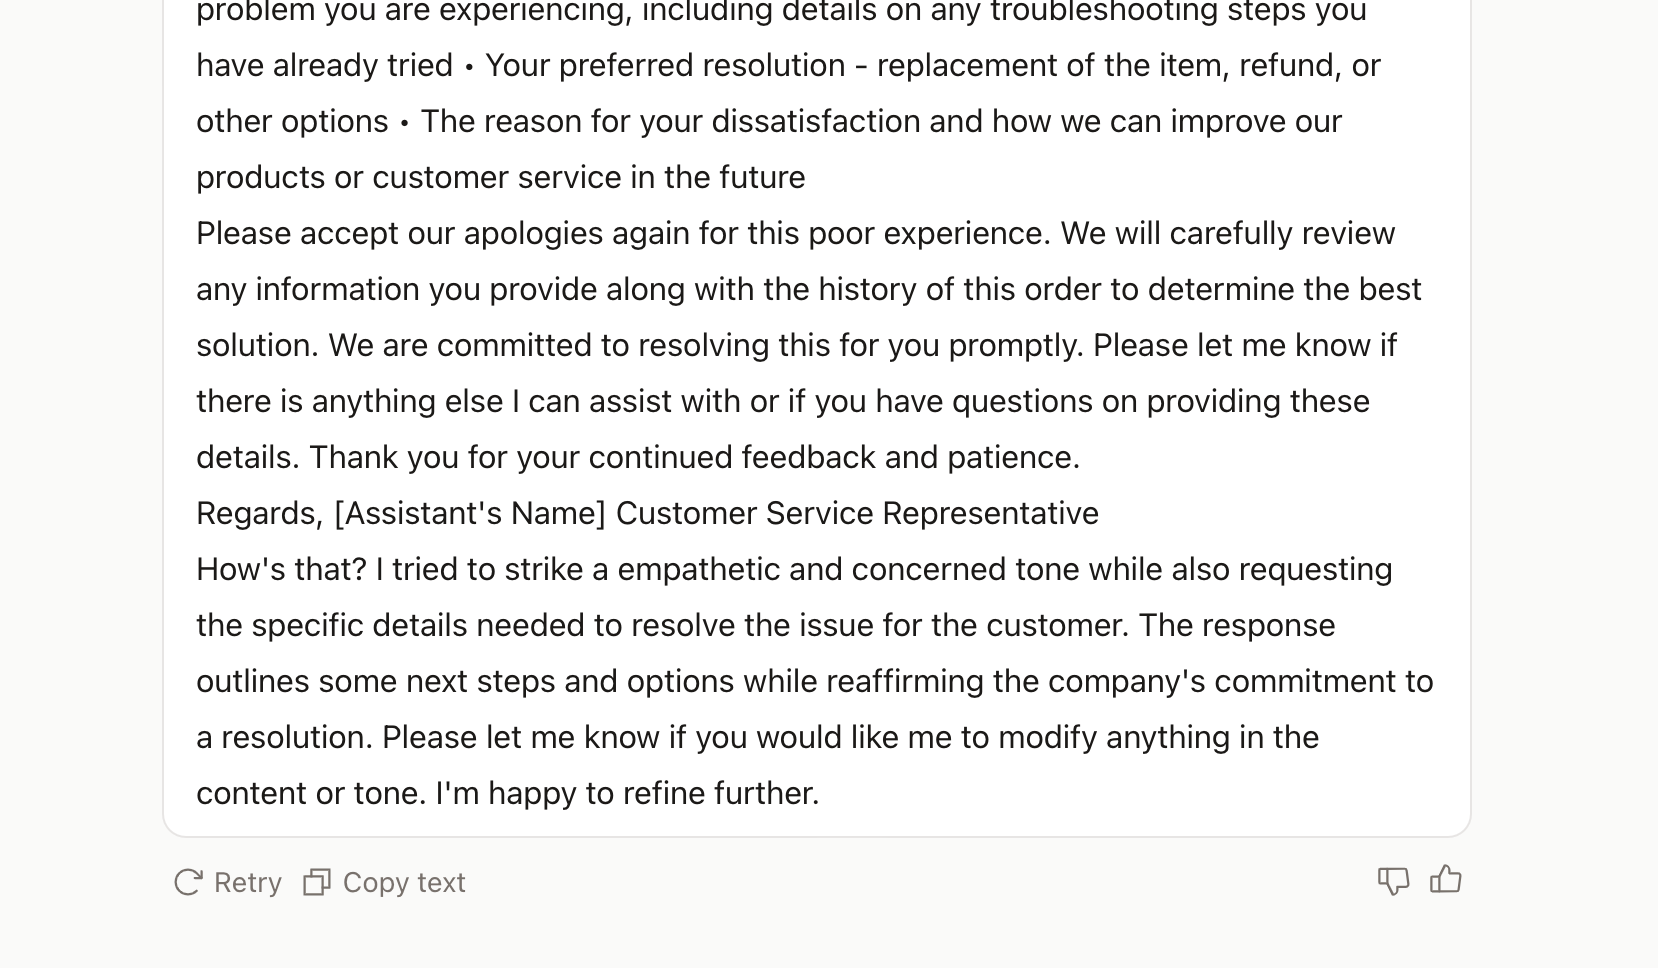 Claude responds to an angry customer email #2